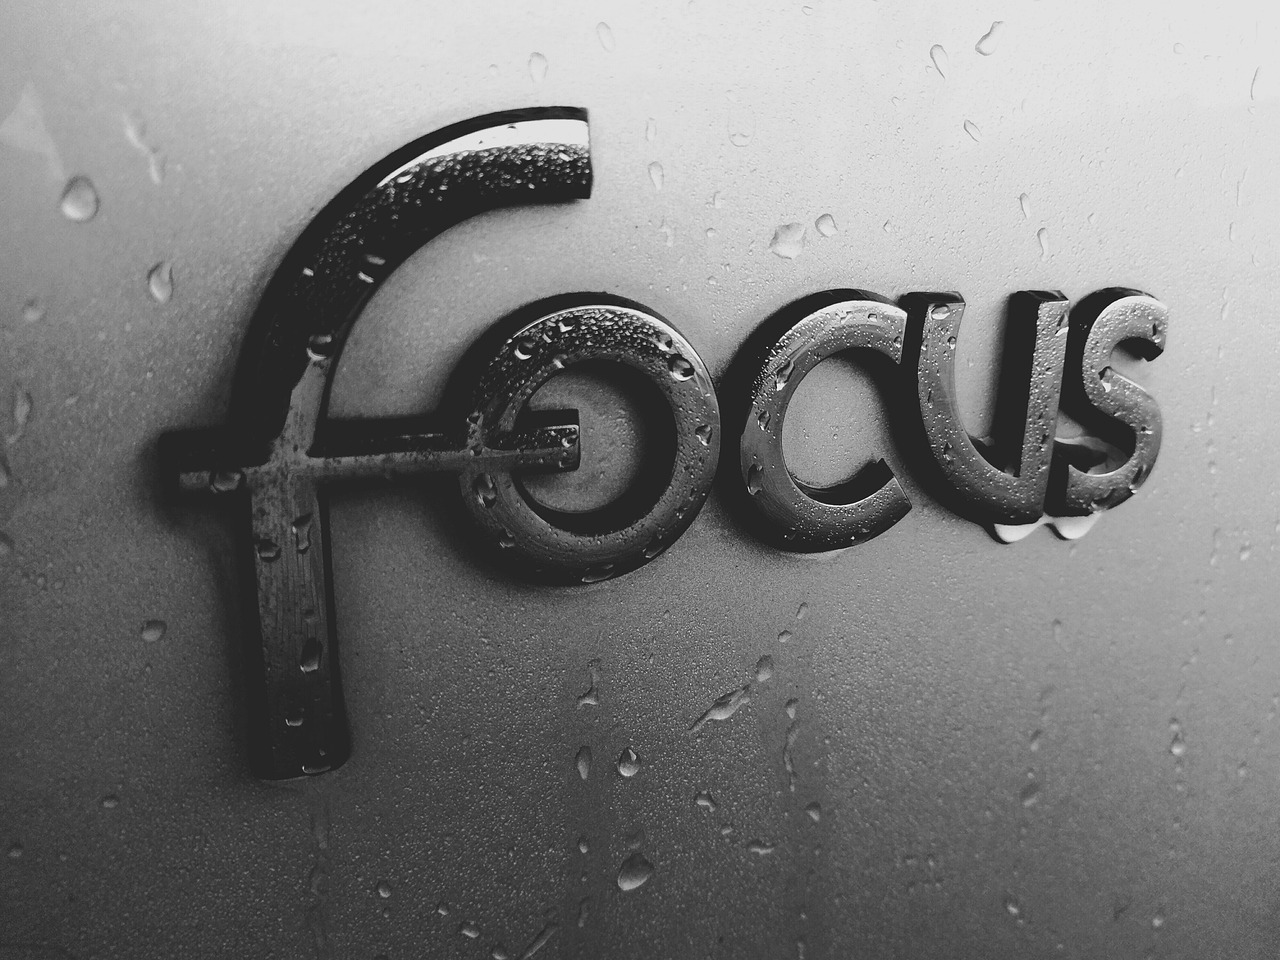 ford focus logo on the back of a car